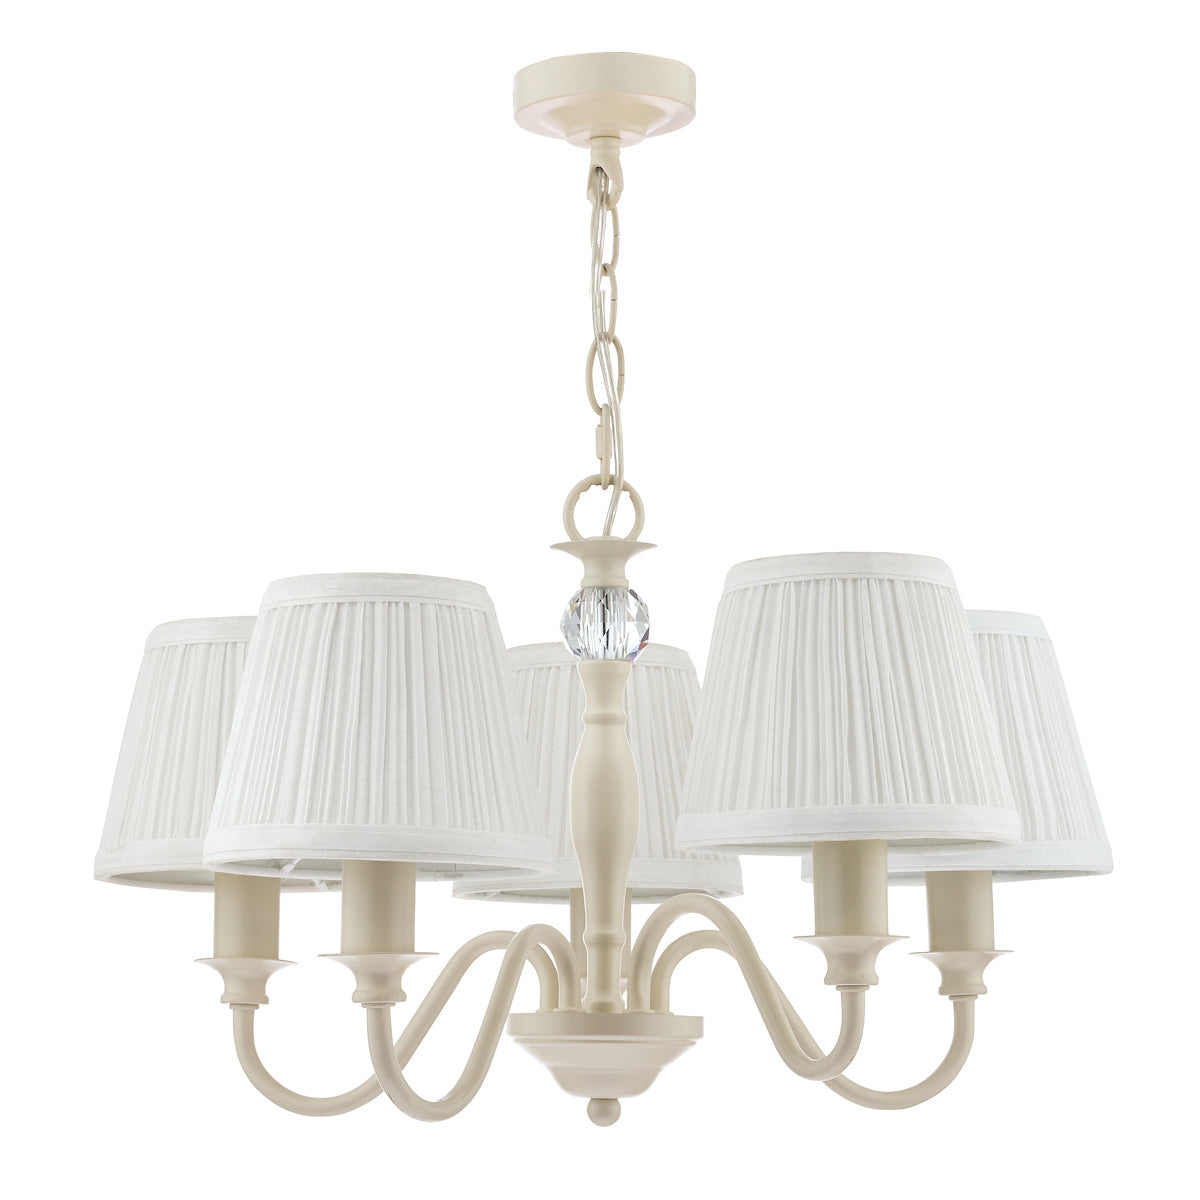 Laura Ashley Ellis Satin-Painted Spindle LA3726687-Q 5 Light Ceiling Light  Chandelier with Ivory Shades